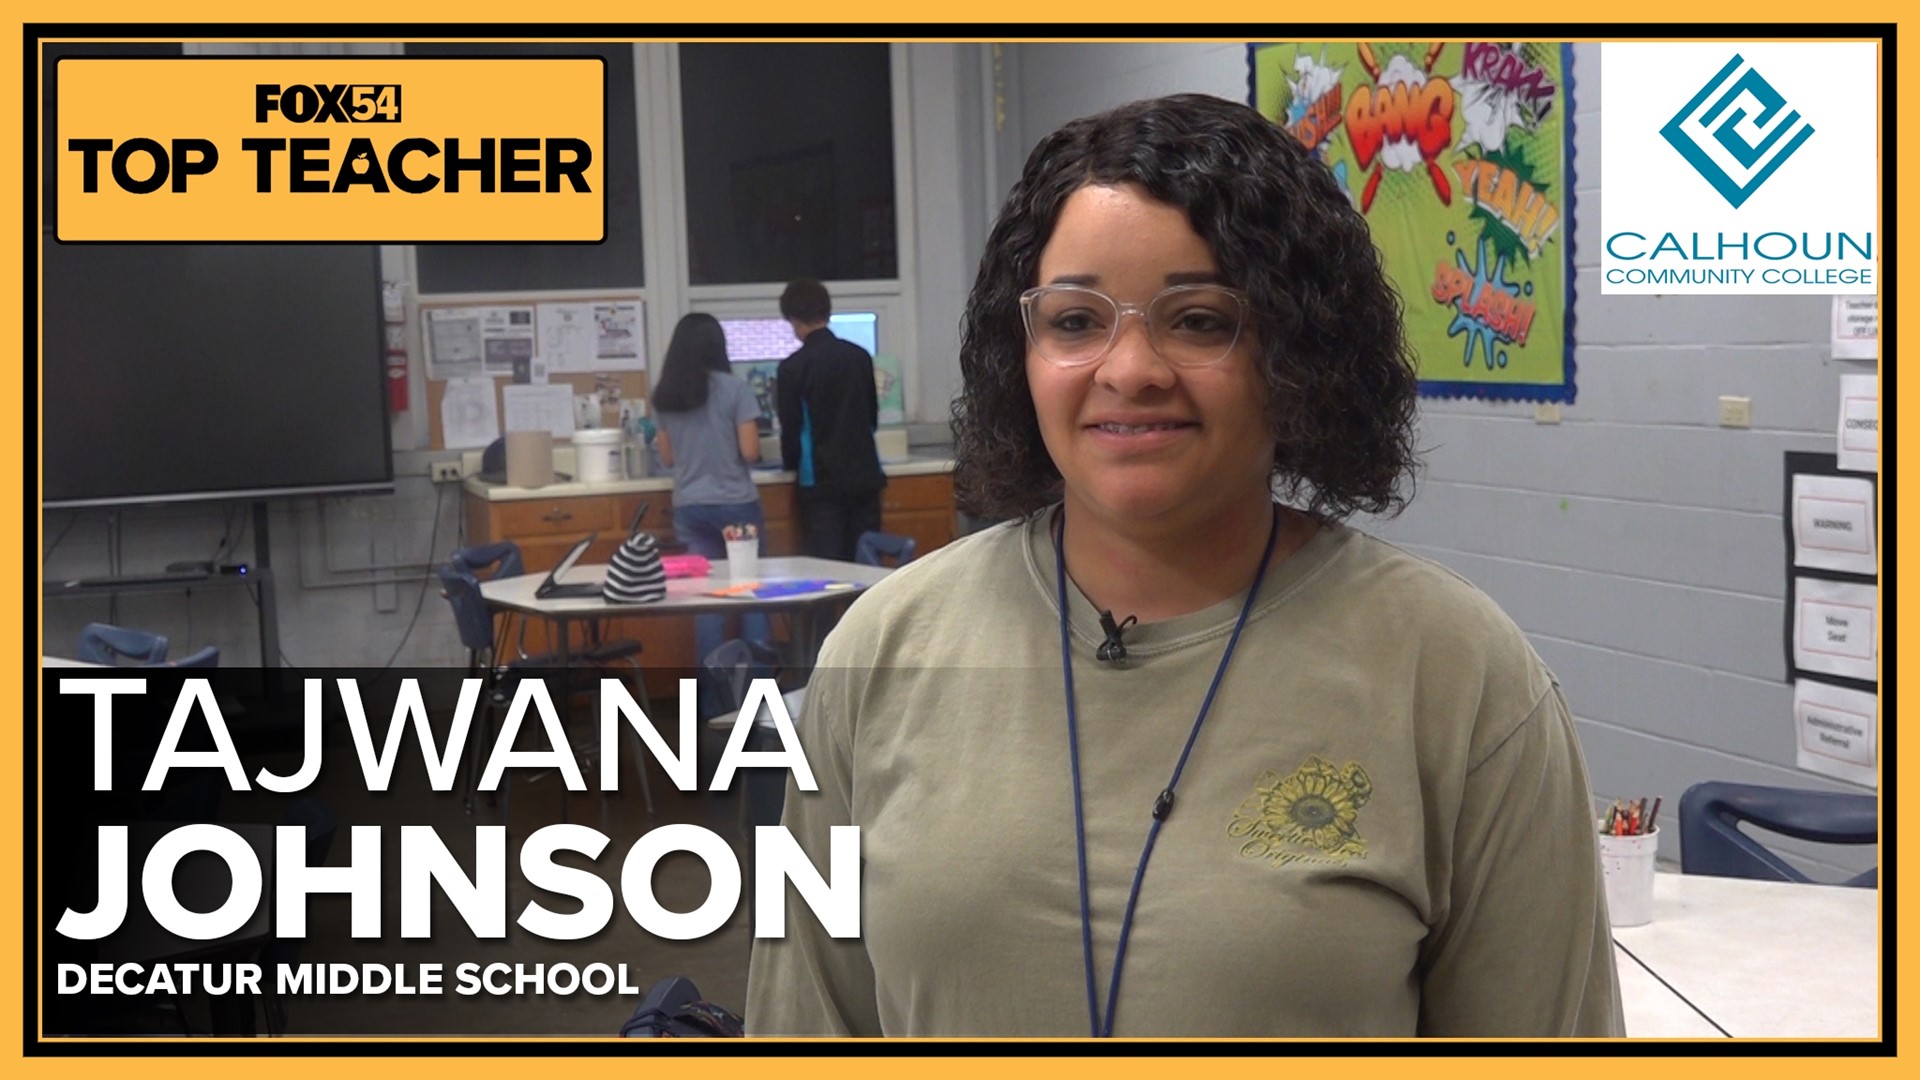 The top teacher of the week Tajwana Johnson mentors and teaches students how to be creative with art.